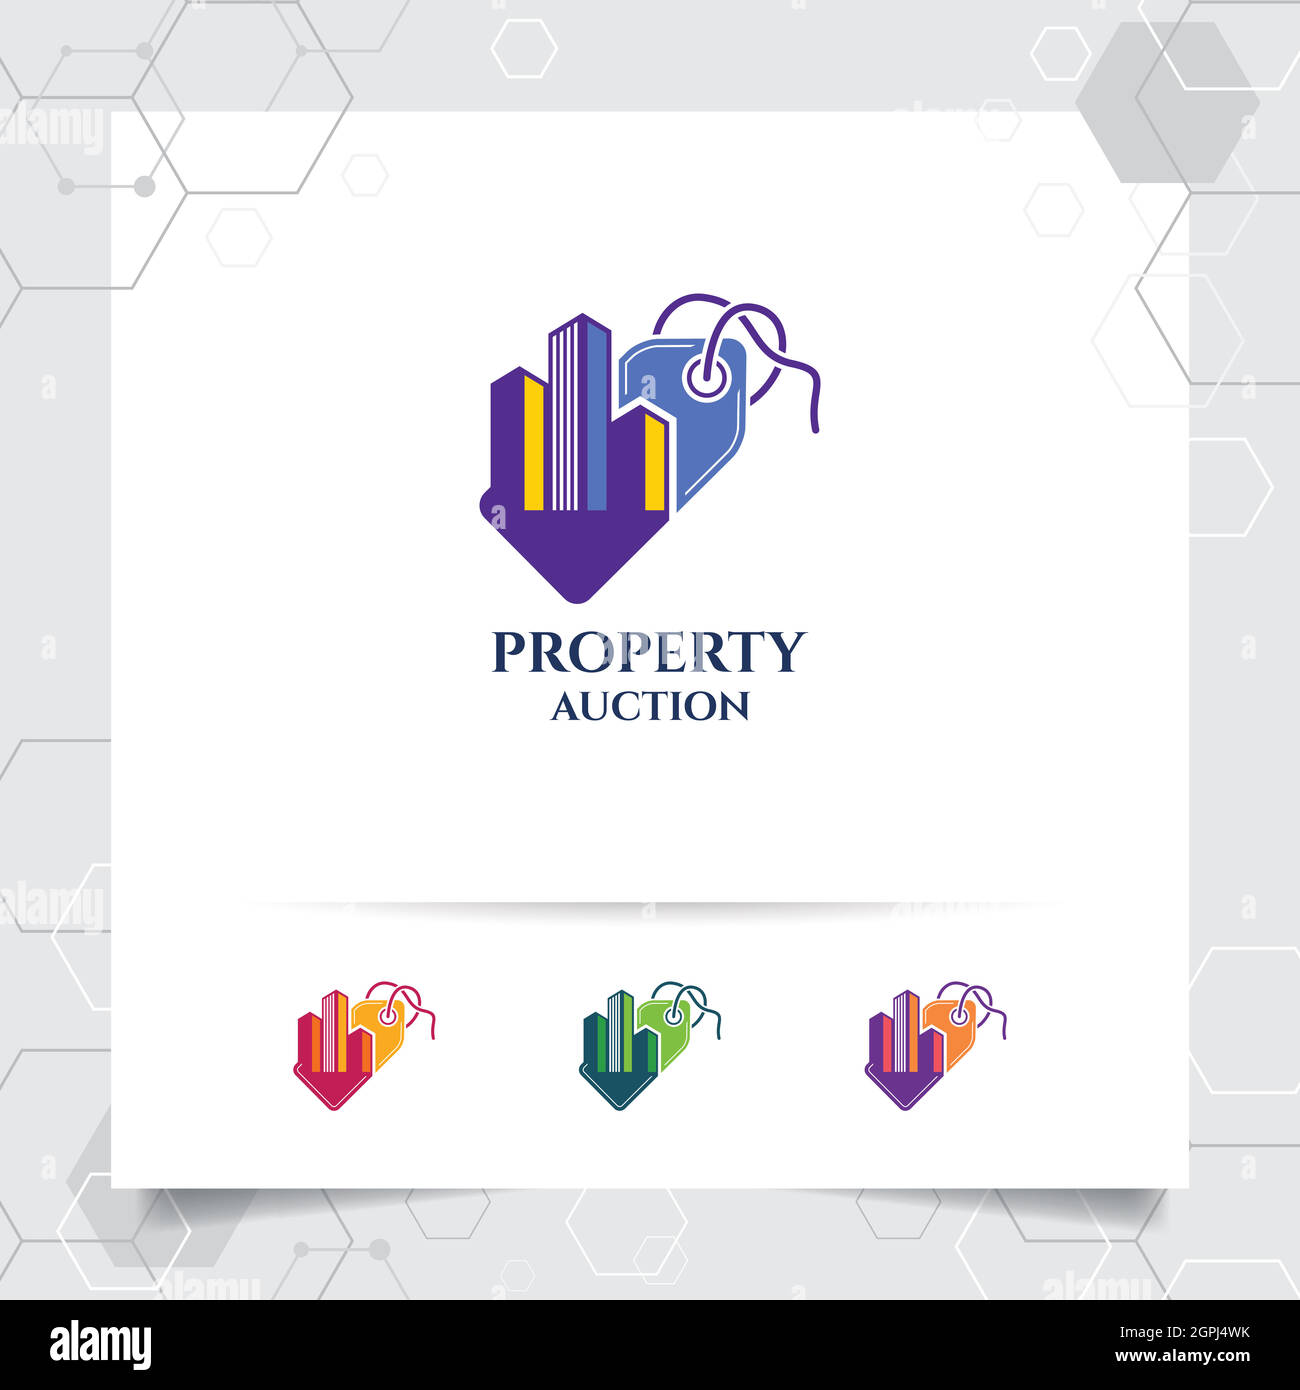 Property sell logo design vector concept of price tag icon and real estate illustration for construction, residence, and property. Stock Vector